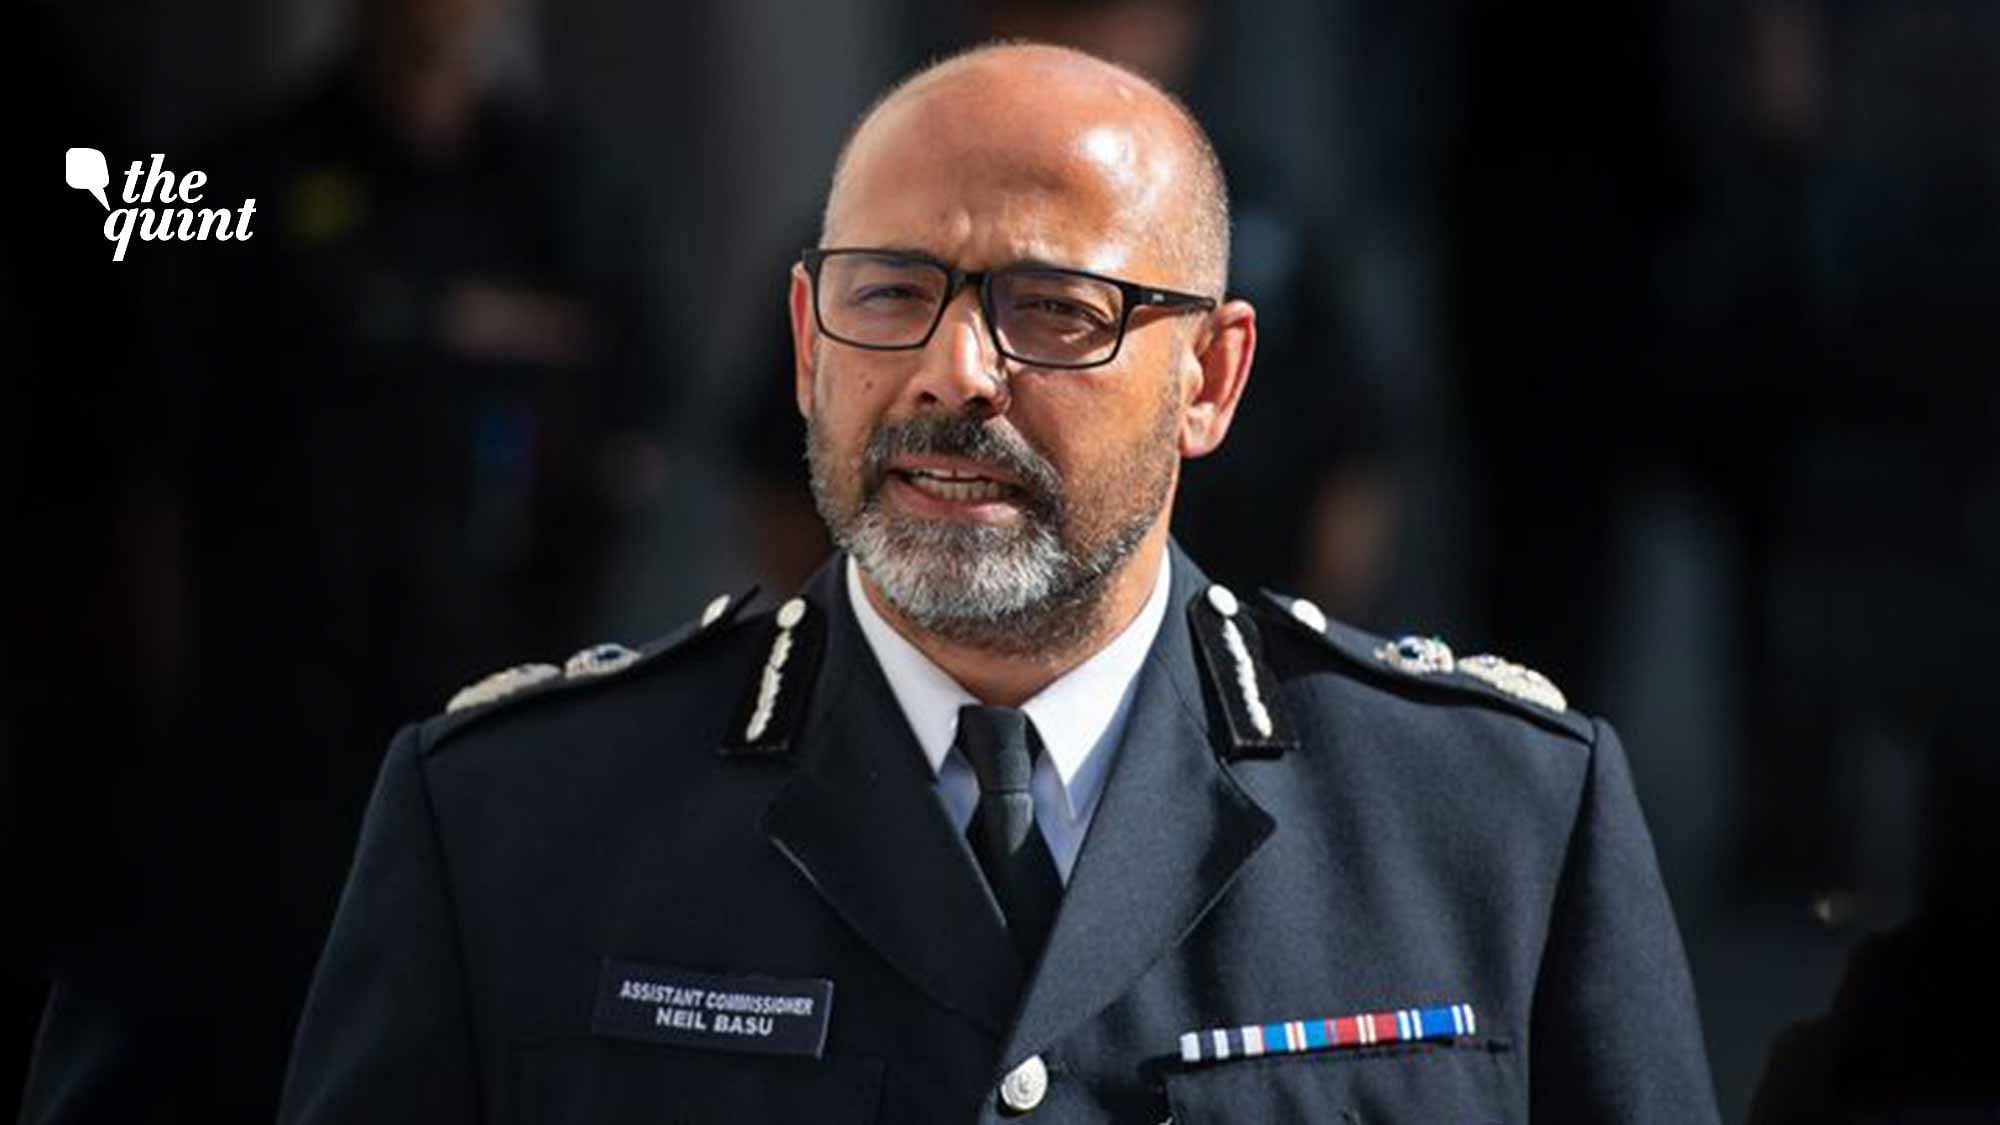 <div class="paragraphs"><p>Neil Basu, currently the&nbsp;Assistant Commissioner (Specialist Operations) of the London Metropolitan Police.&nbsp;</p></div>